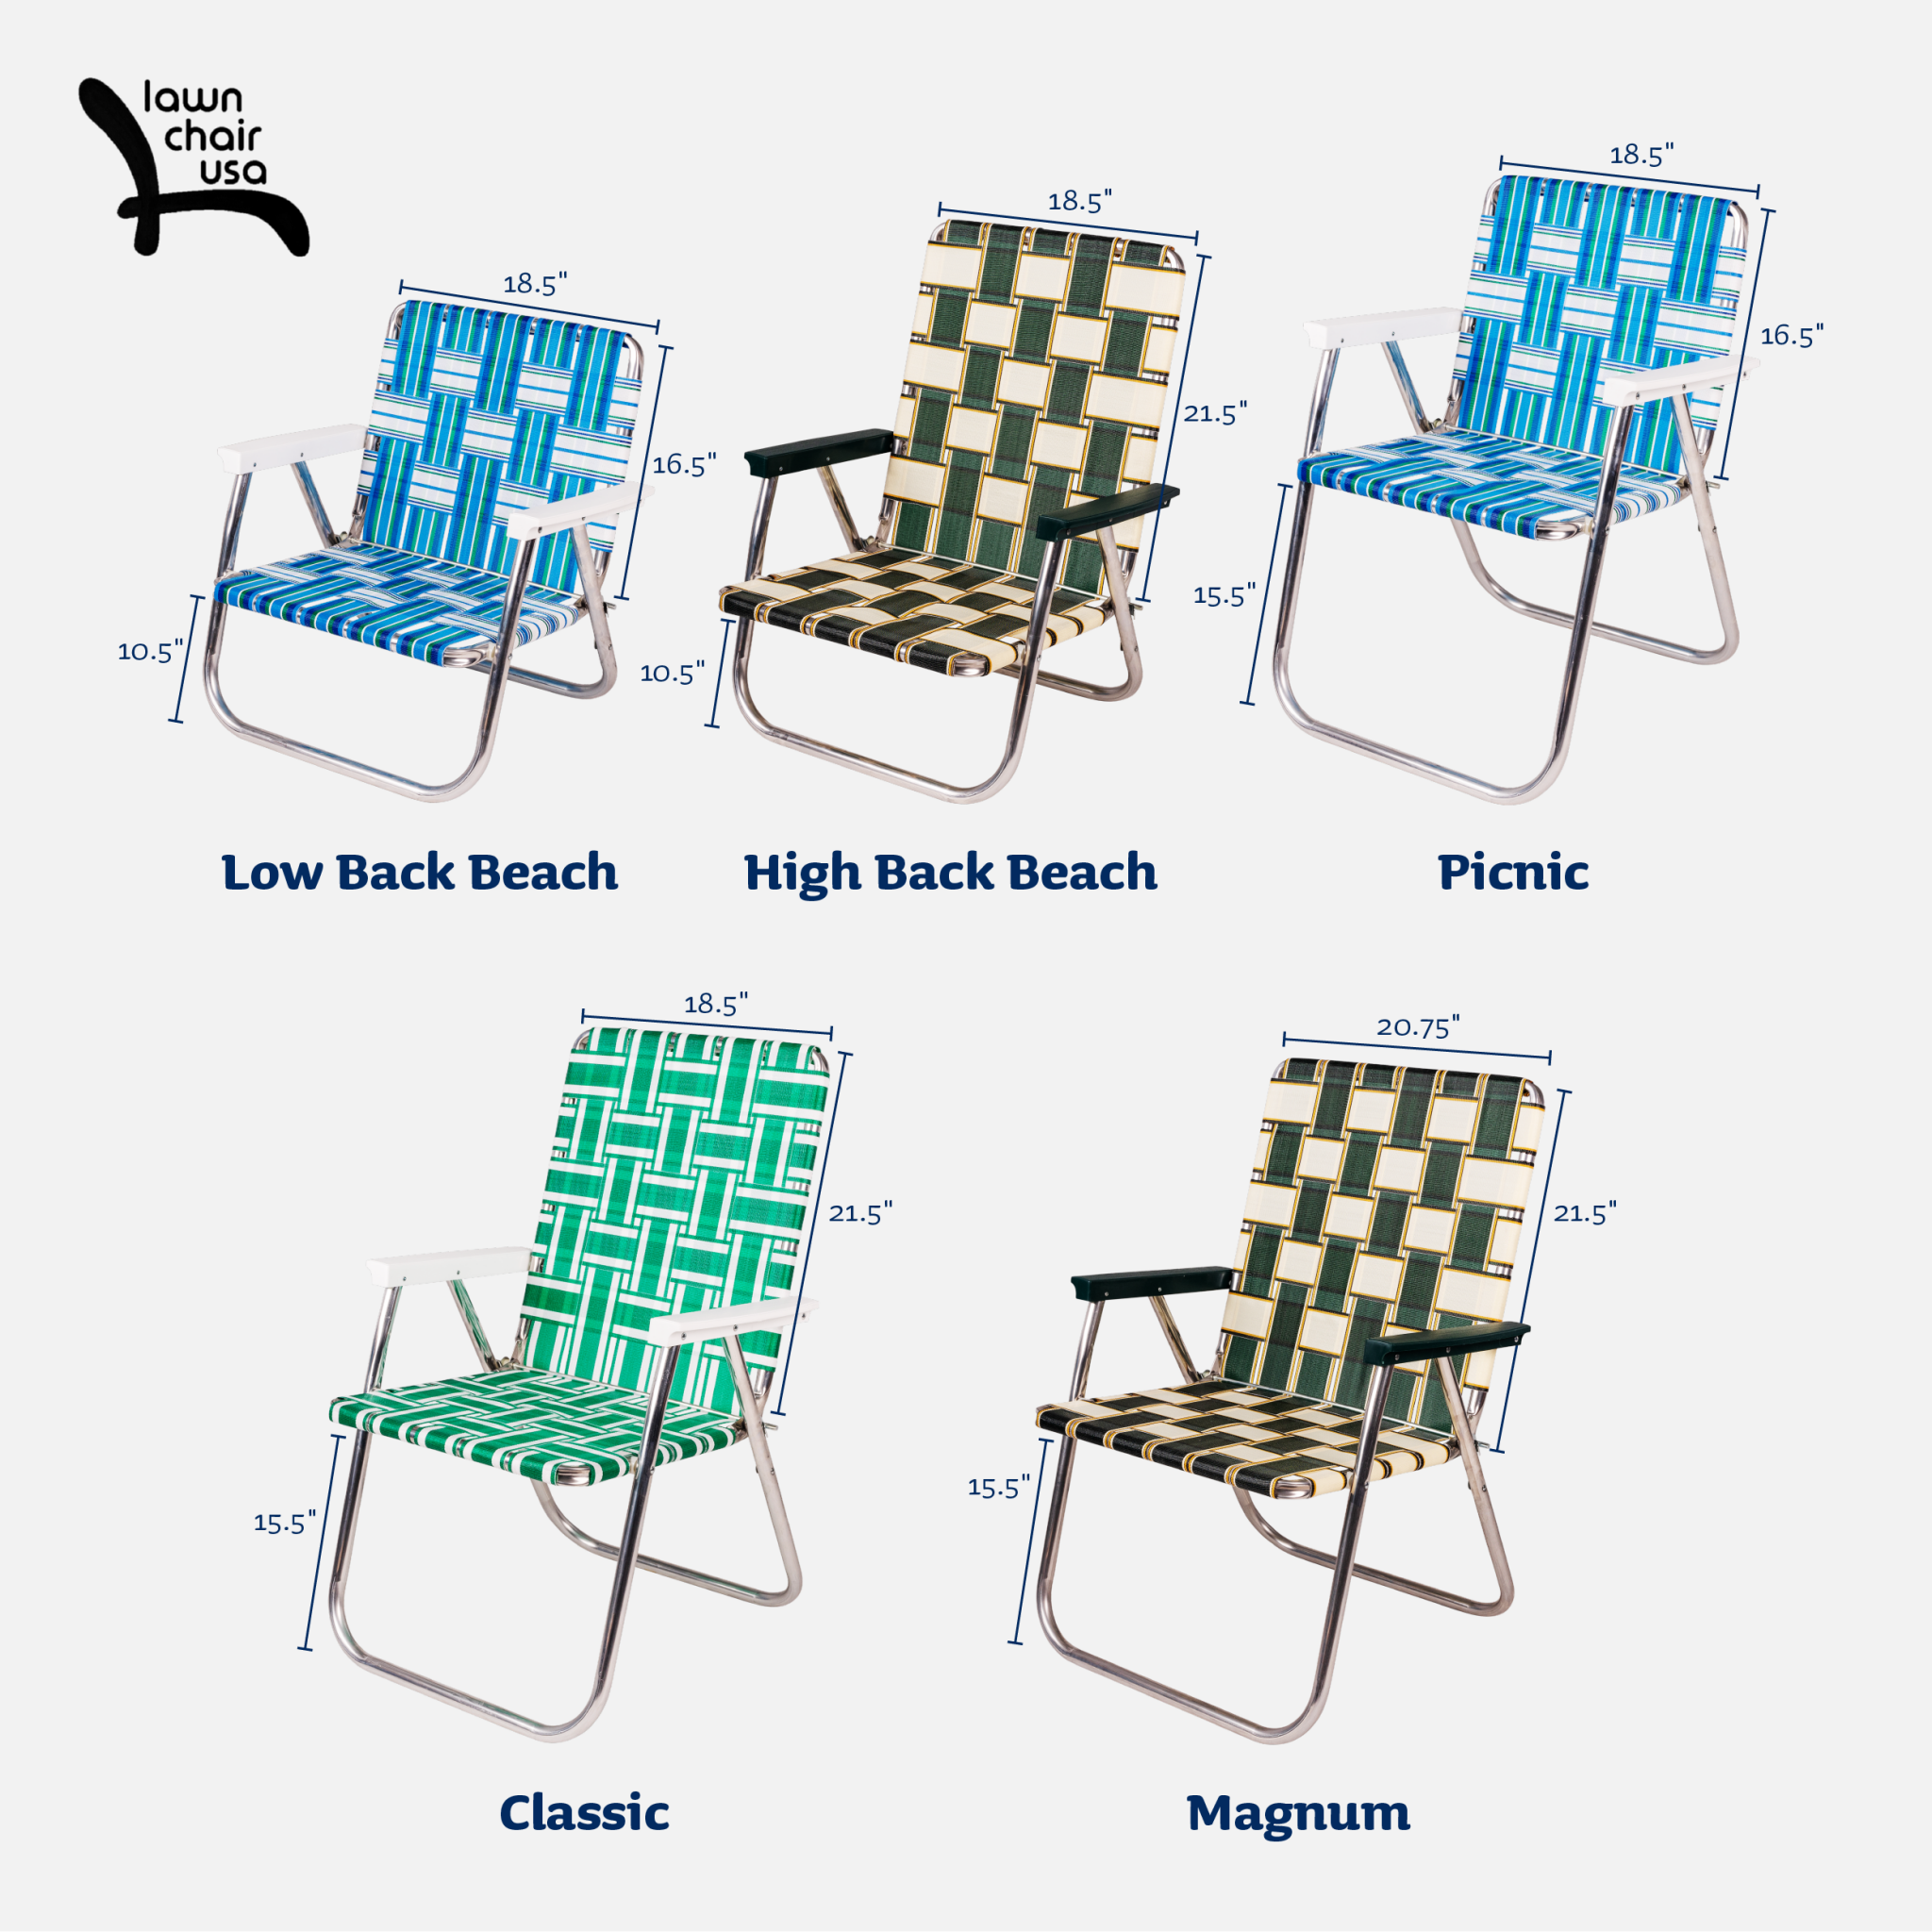 Lawn Chair USA Folding Aluminum Webbing Chair - Trusted Tradition Since